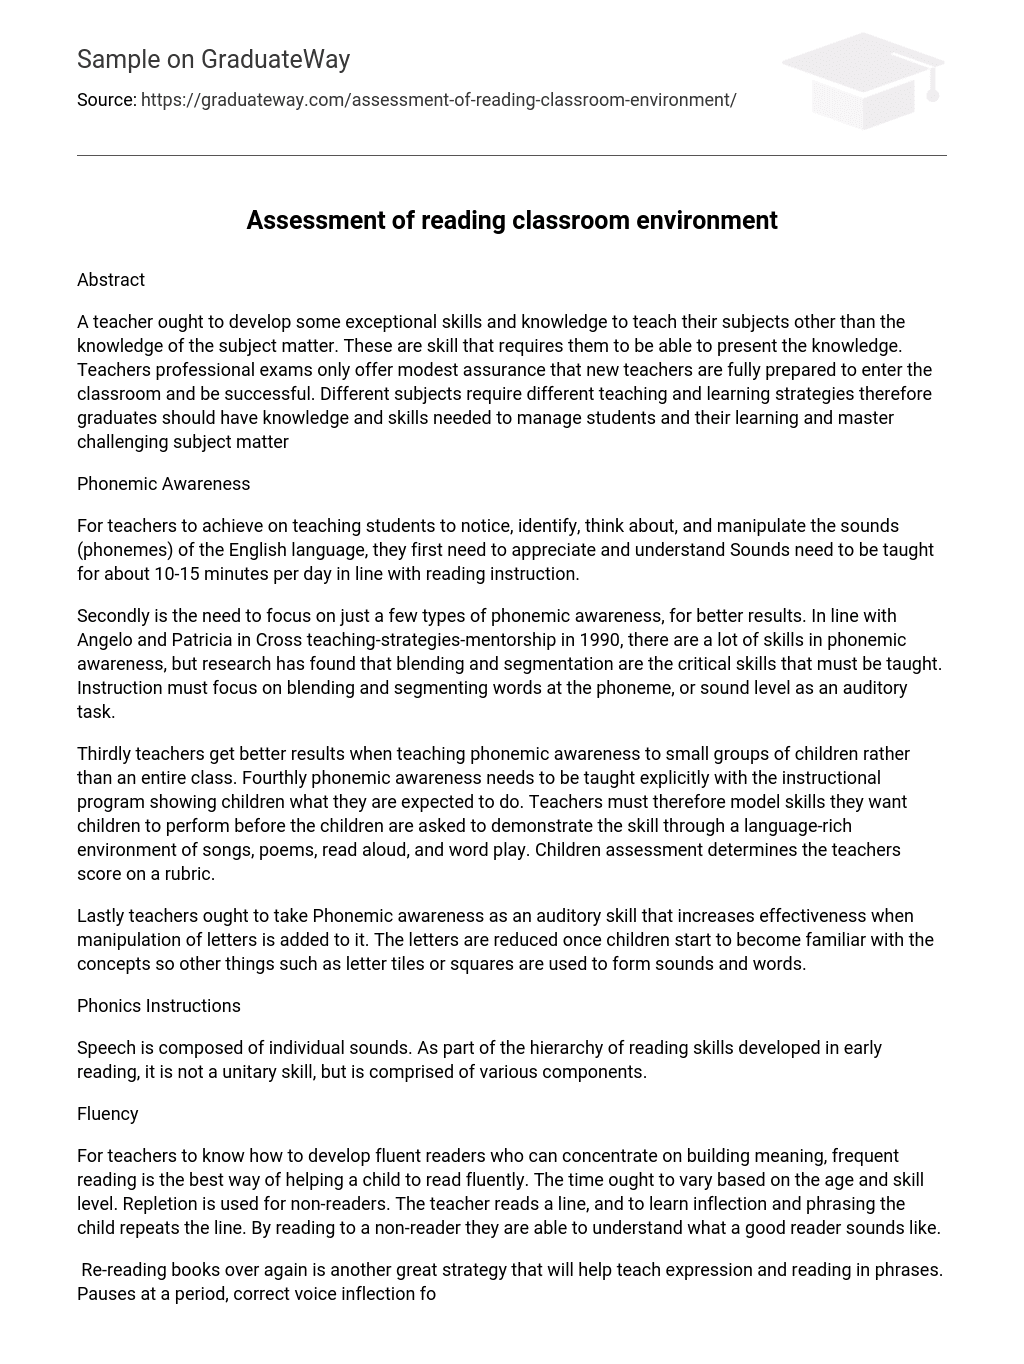 Assessment of reading classroom environment